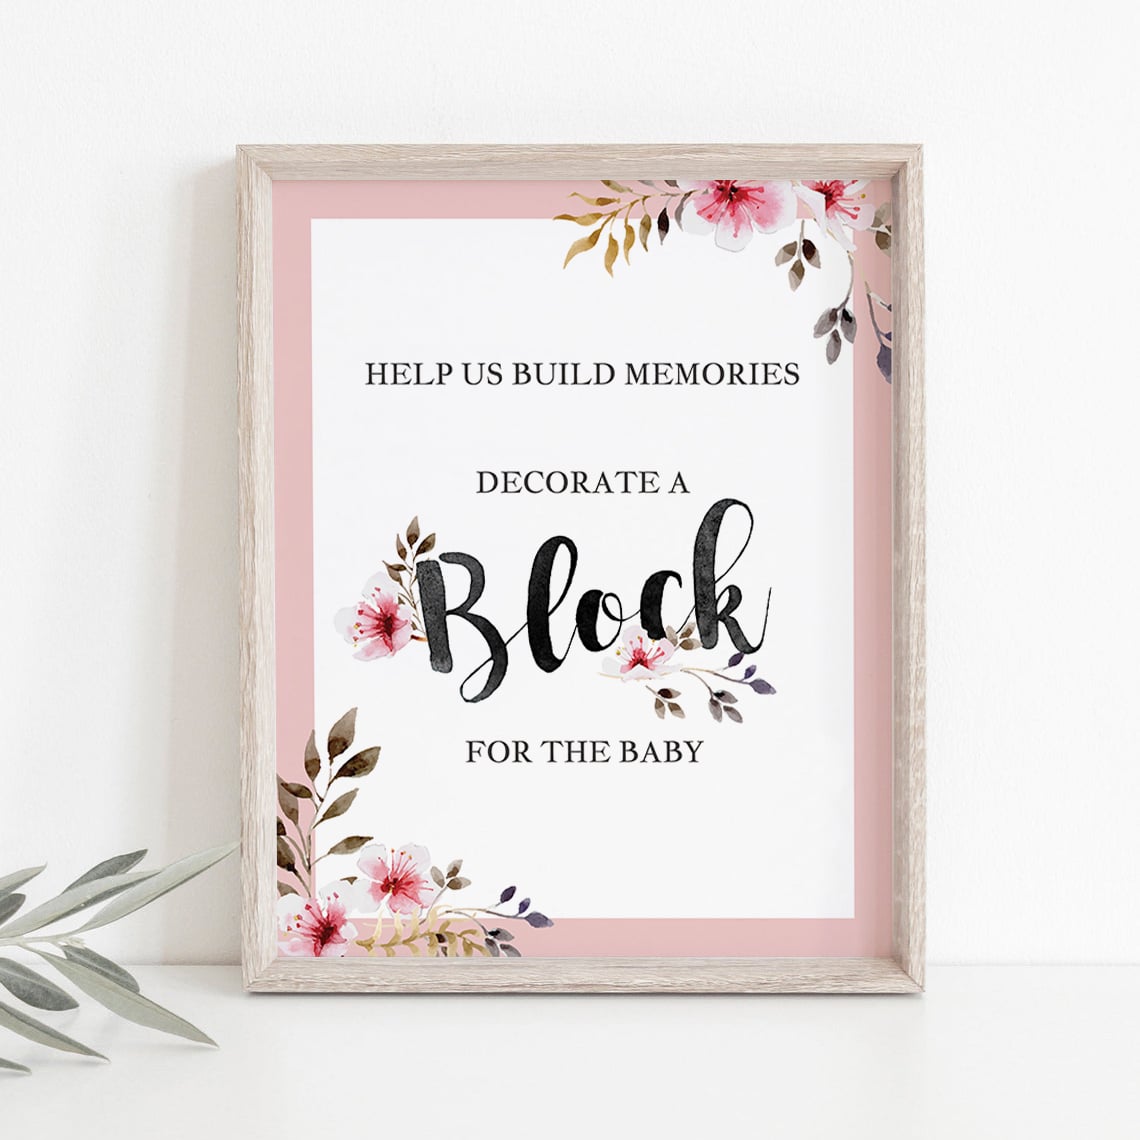 Decorate a block for baby girl table decor signs printable by LittleSizzle